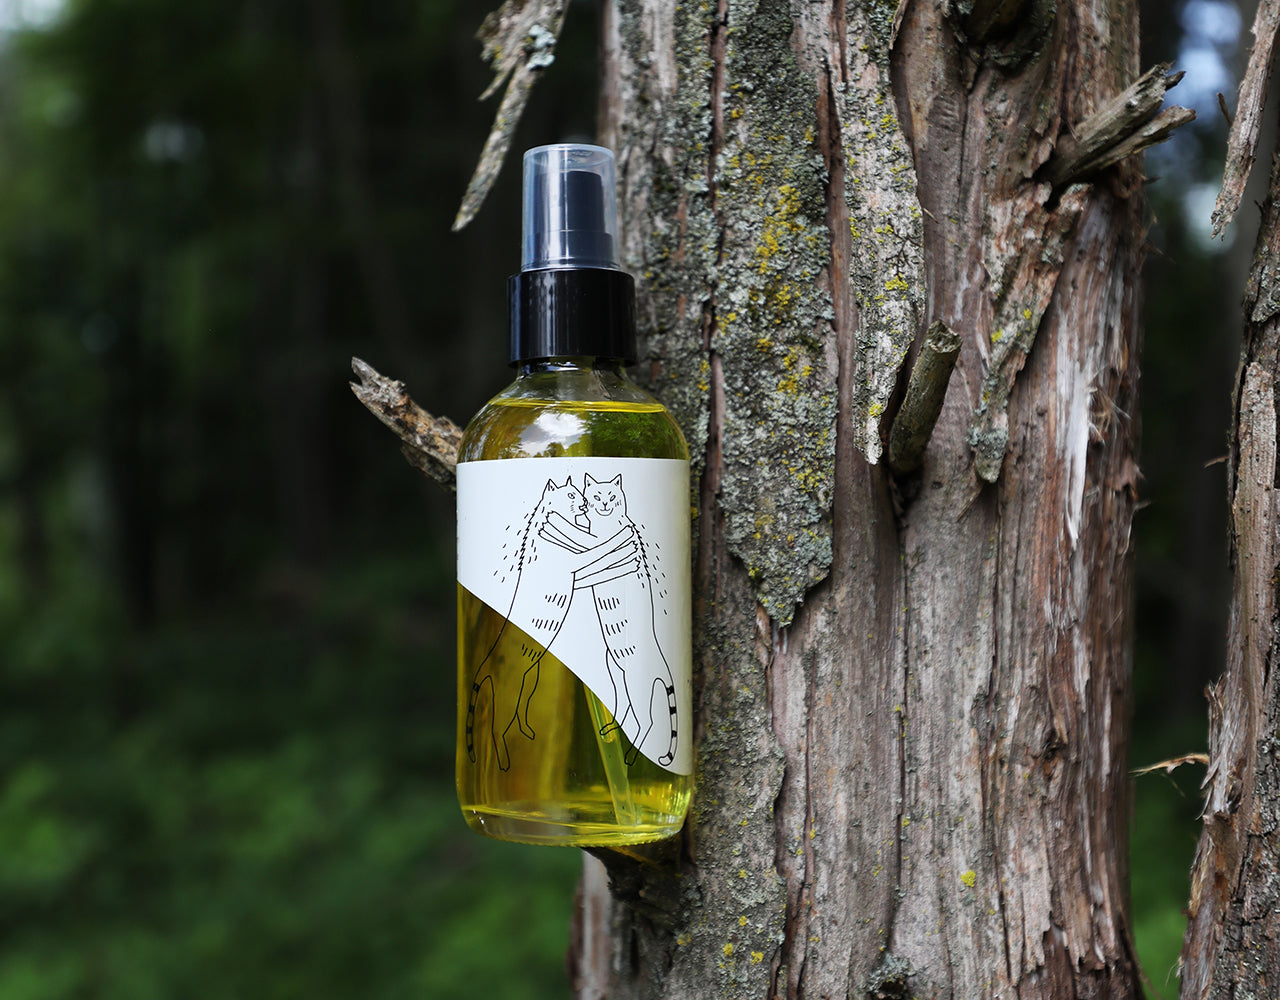 A bottle of Lemon Rose Cleansing oil screenprinted with two cats standing on hind legs grooming each other. The bottle is in a tree with shredded bark, moss, and lichen.